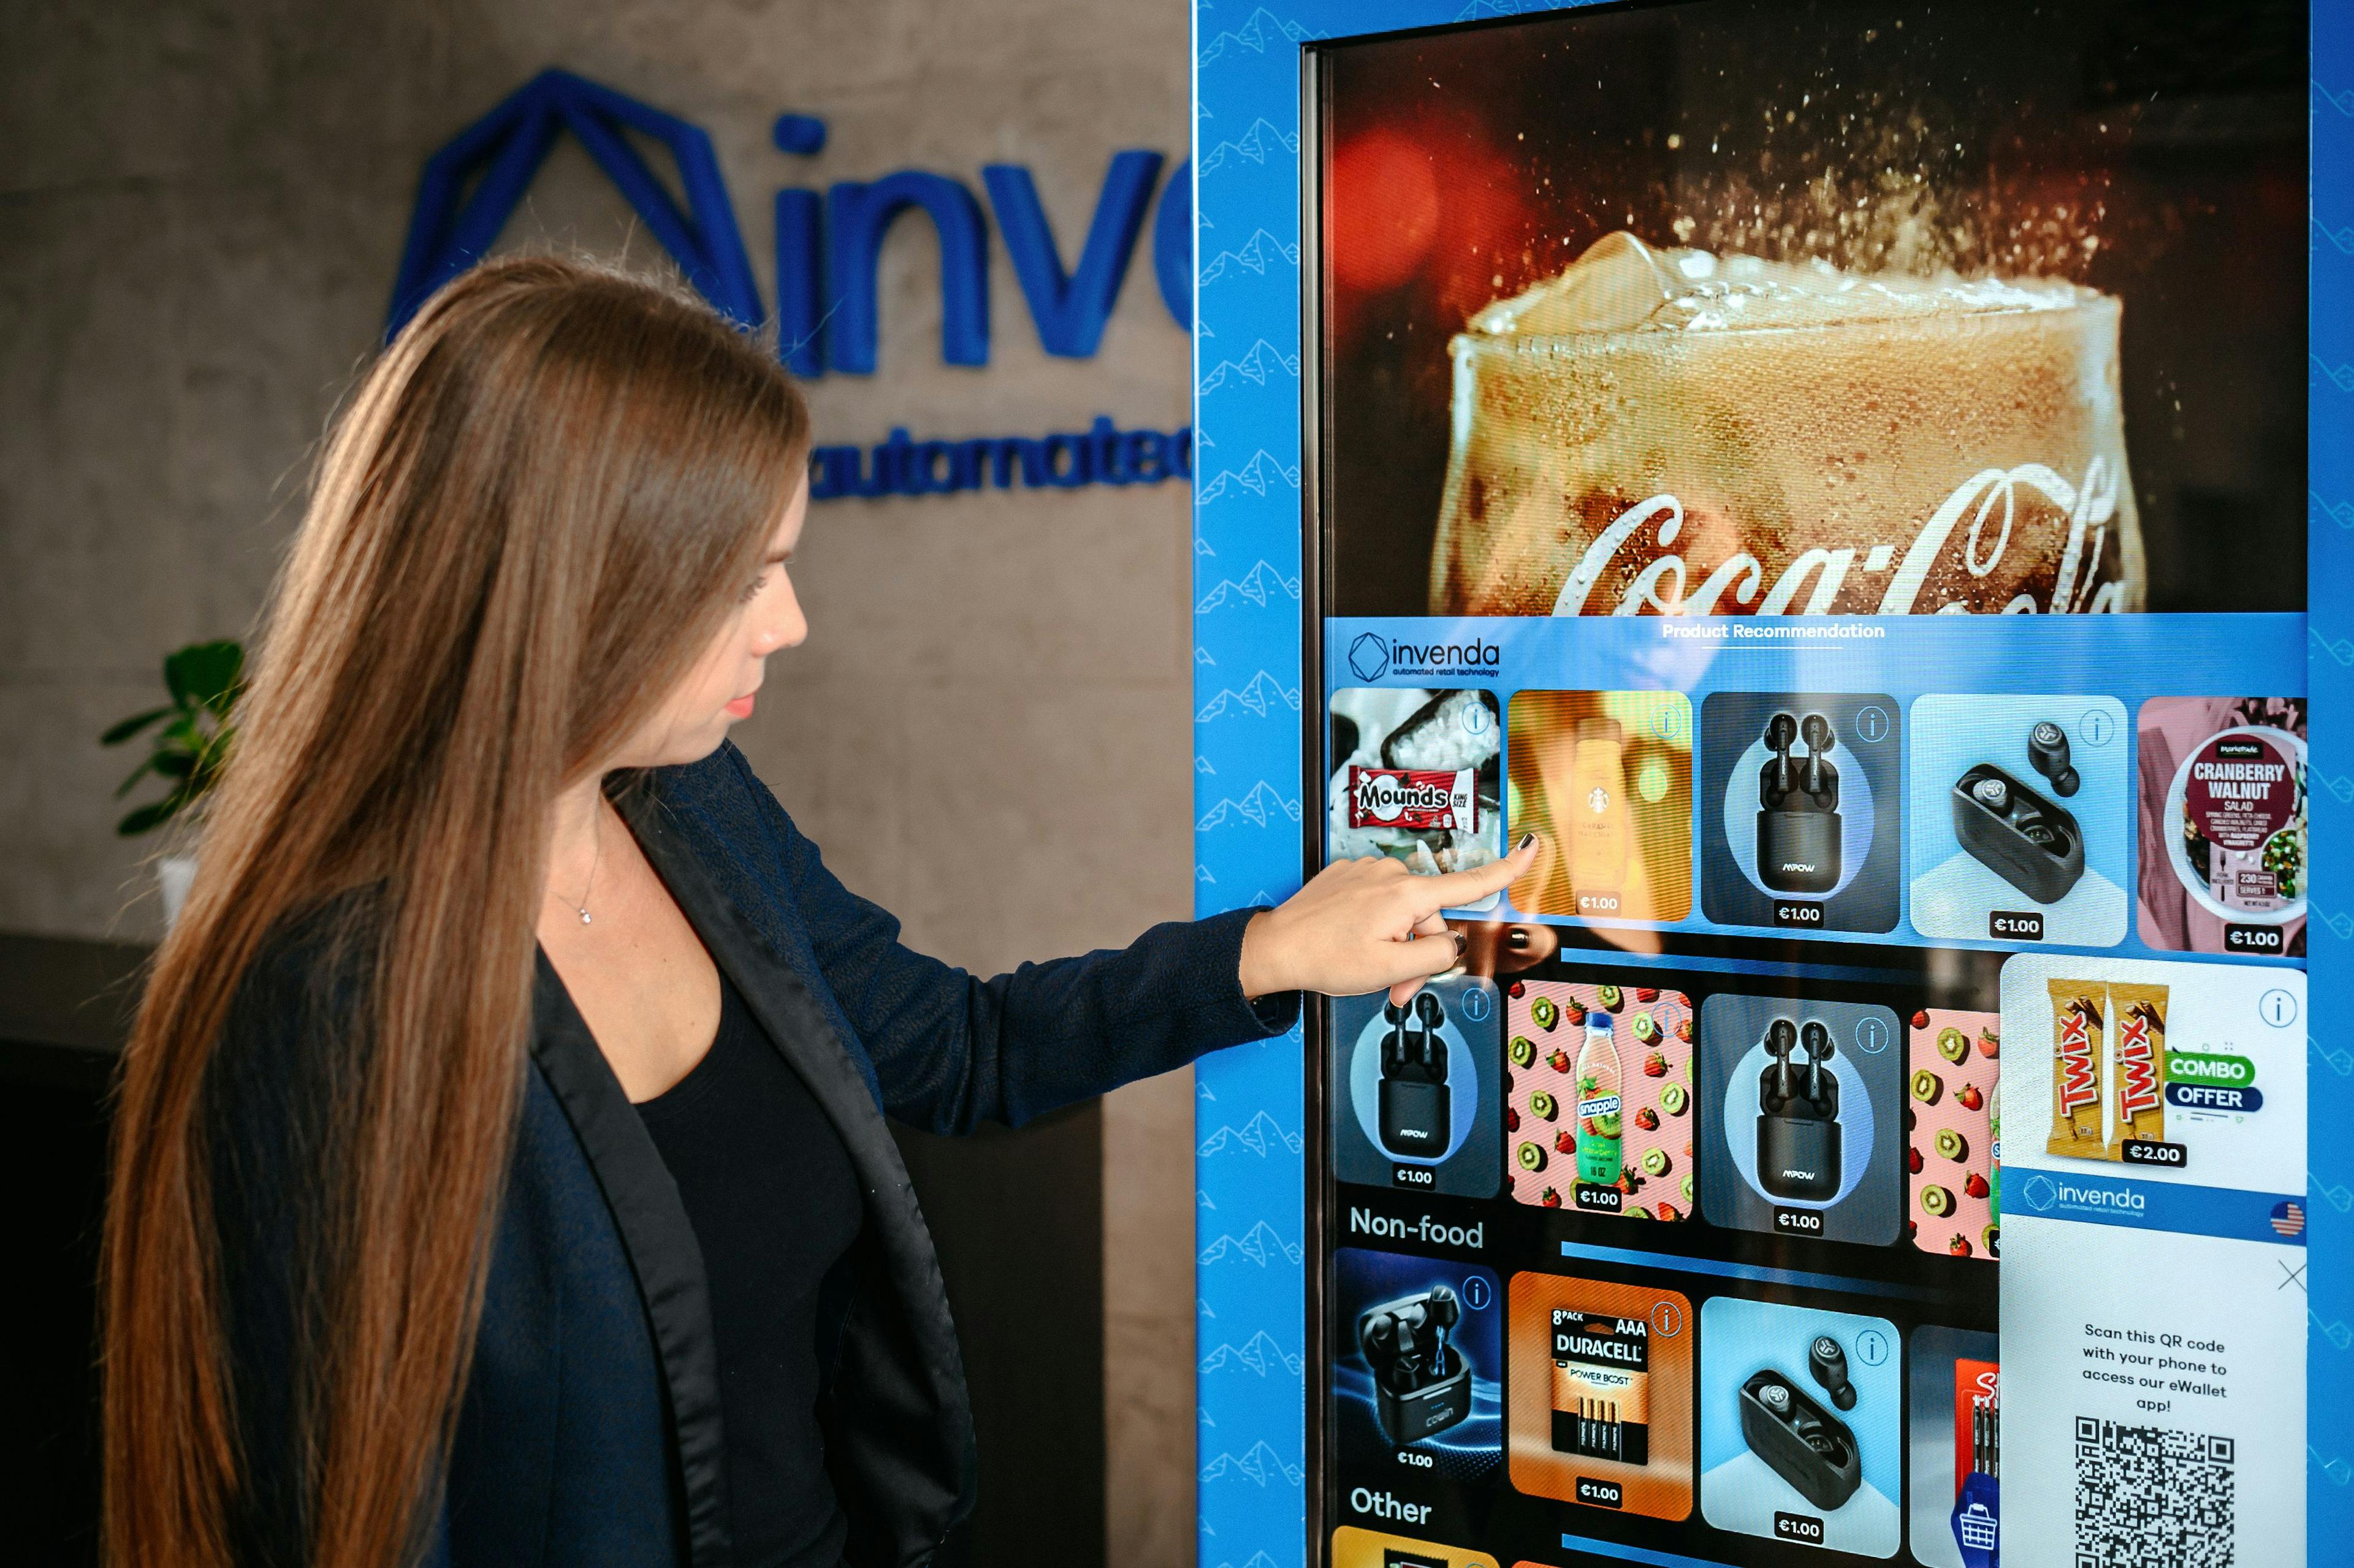 A woman selecting a product on a digital vending machine